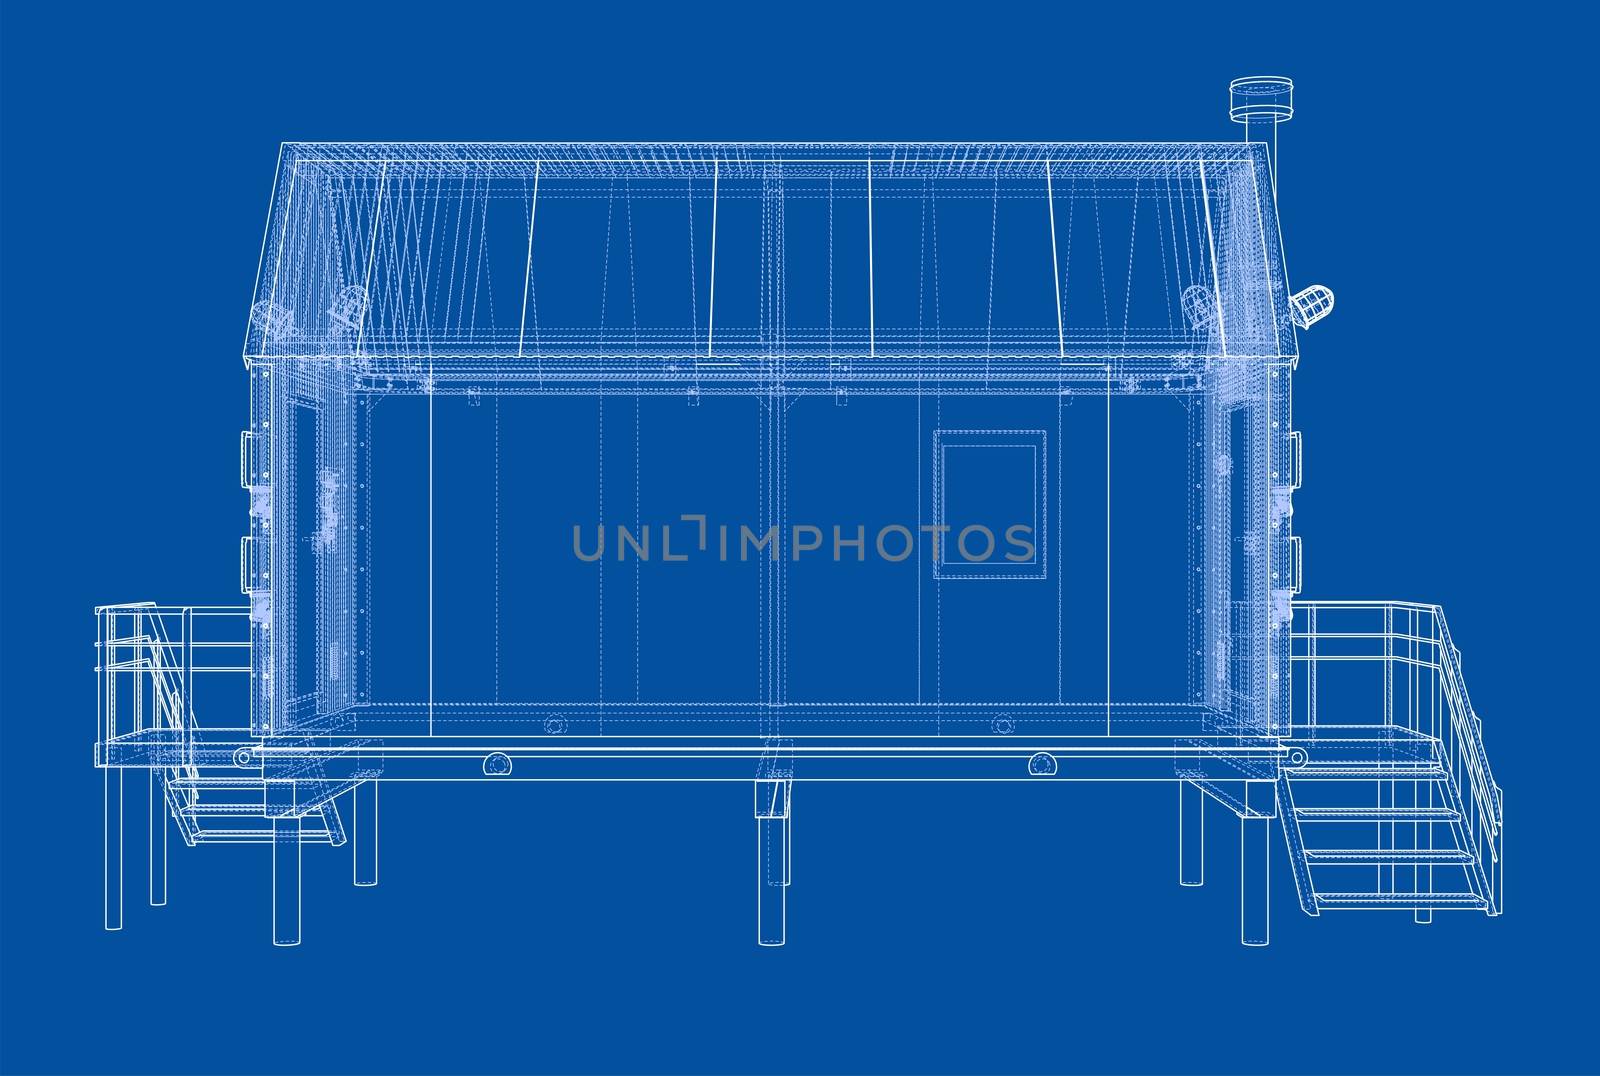 Wire-frame industrial building. 3d illustration. Wire-frame style